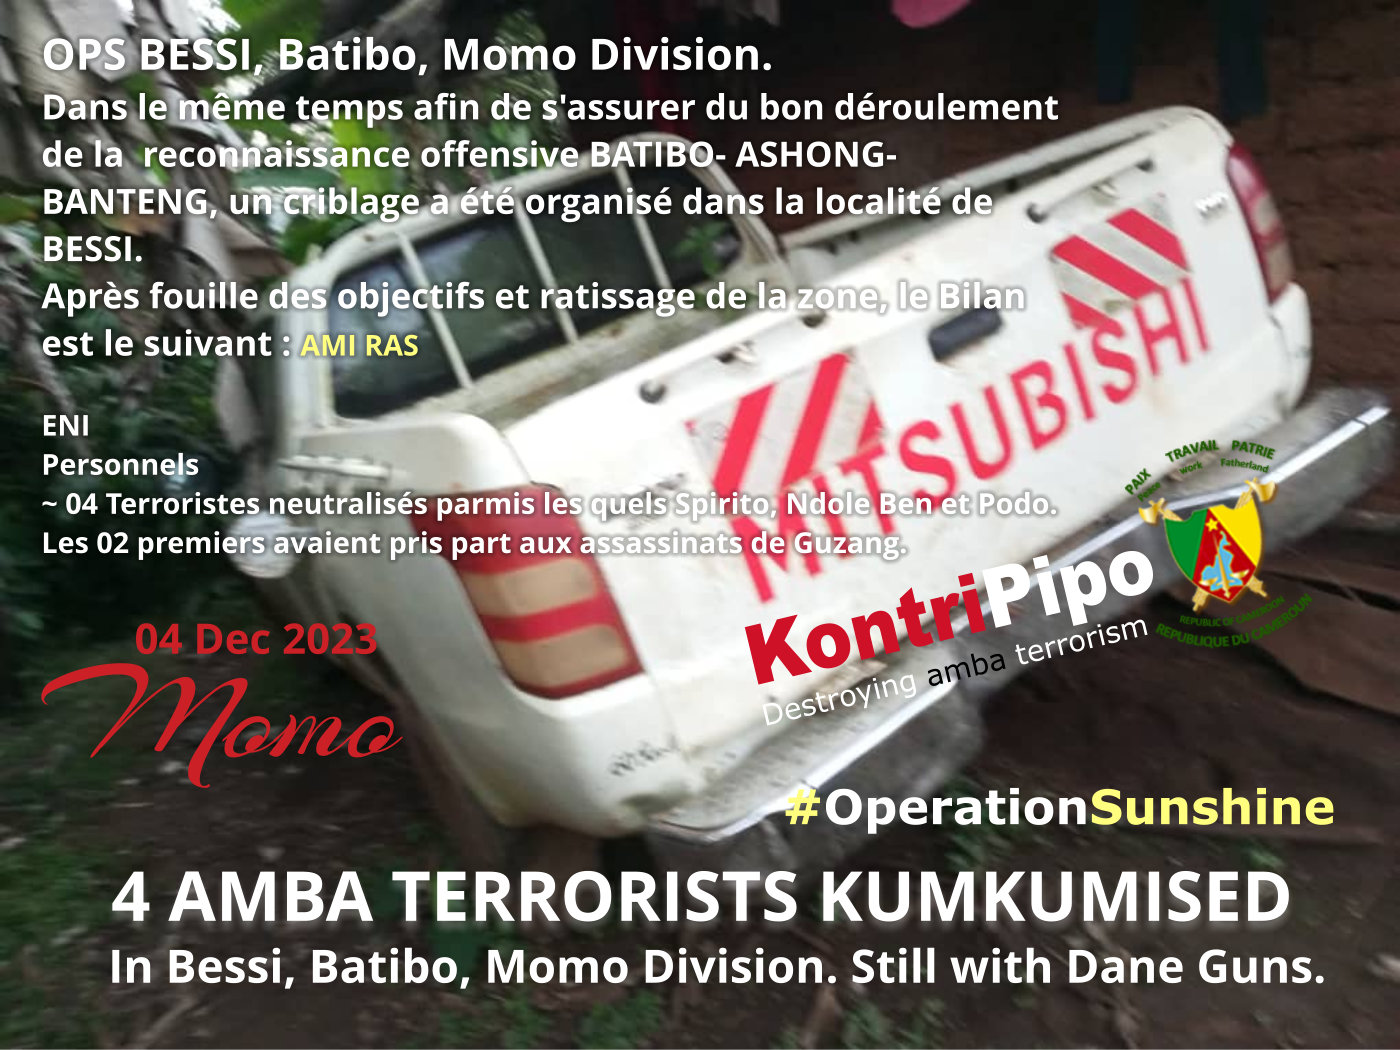 Bessi - Batibo - Momo Operation. 4 amba terrorists kumkumised. The only Solution is to KILL all these terrorists - No dialogue, no appeasement, no negotiation with Terrorists.. DDR is still open. Surrender or DIE!